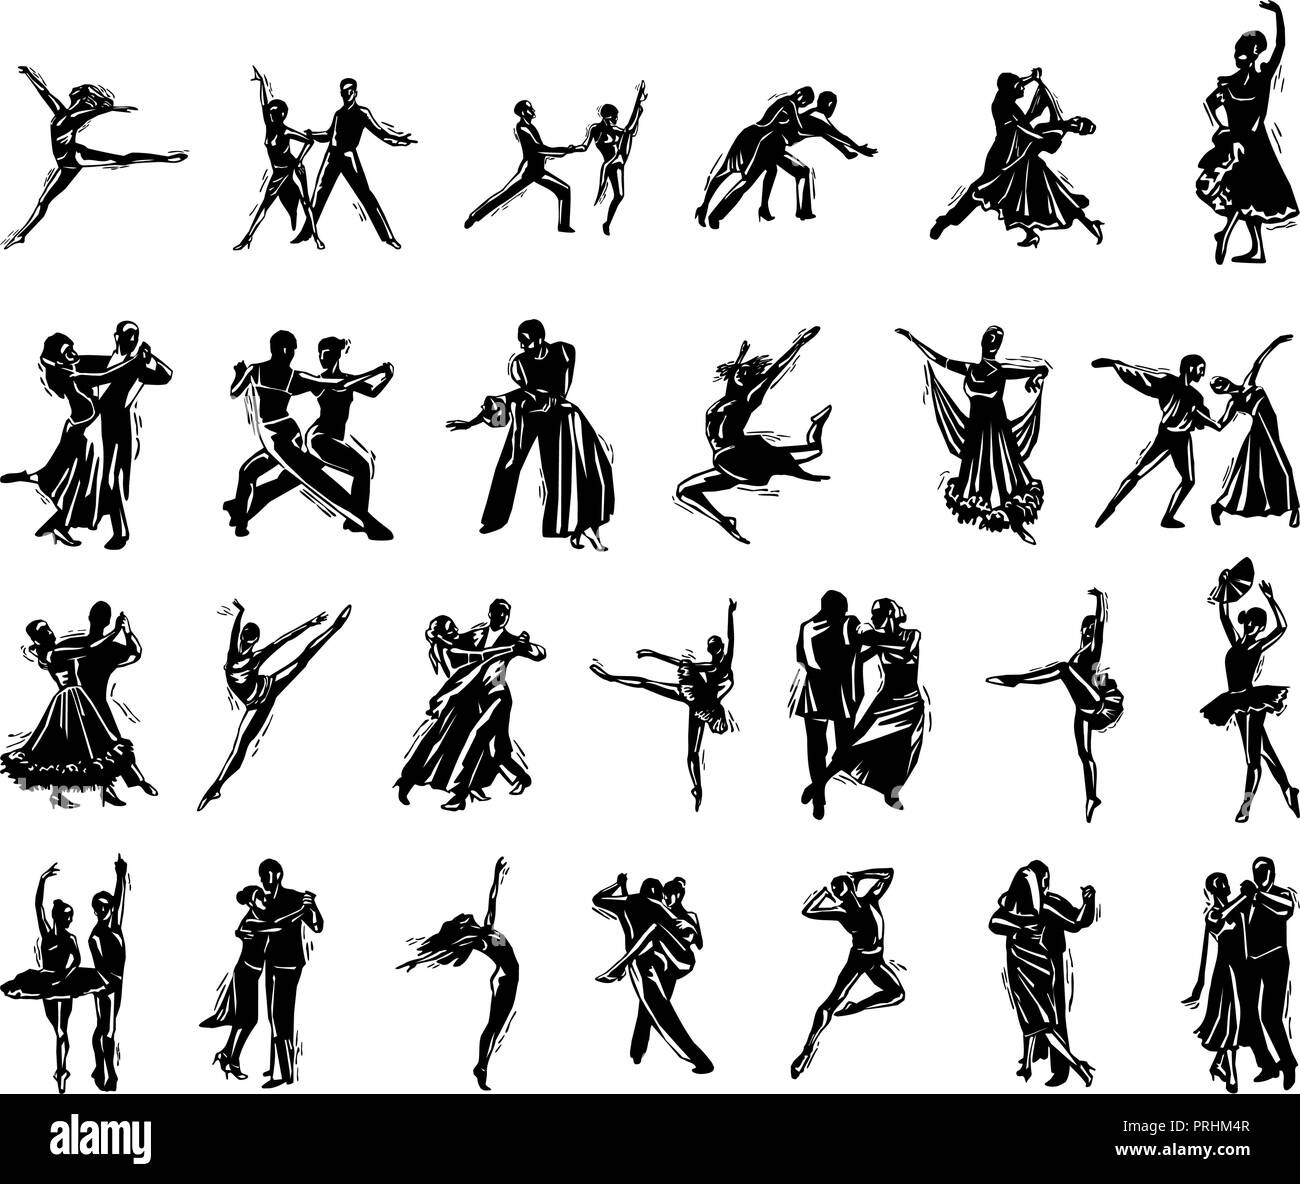 dancer people silhouette collection. Vector Illustration. Stock Vector